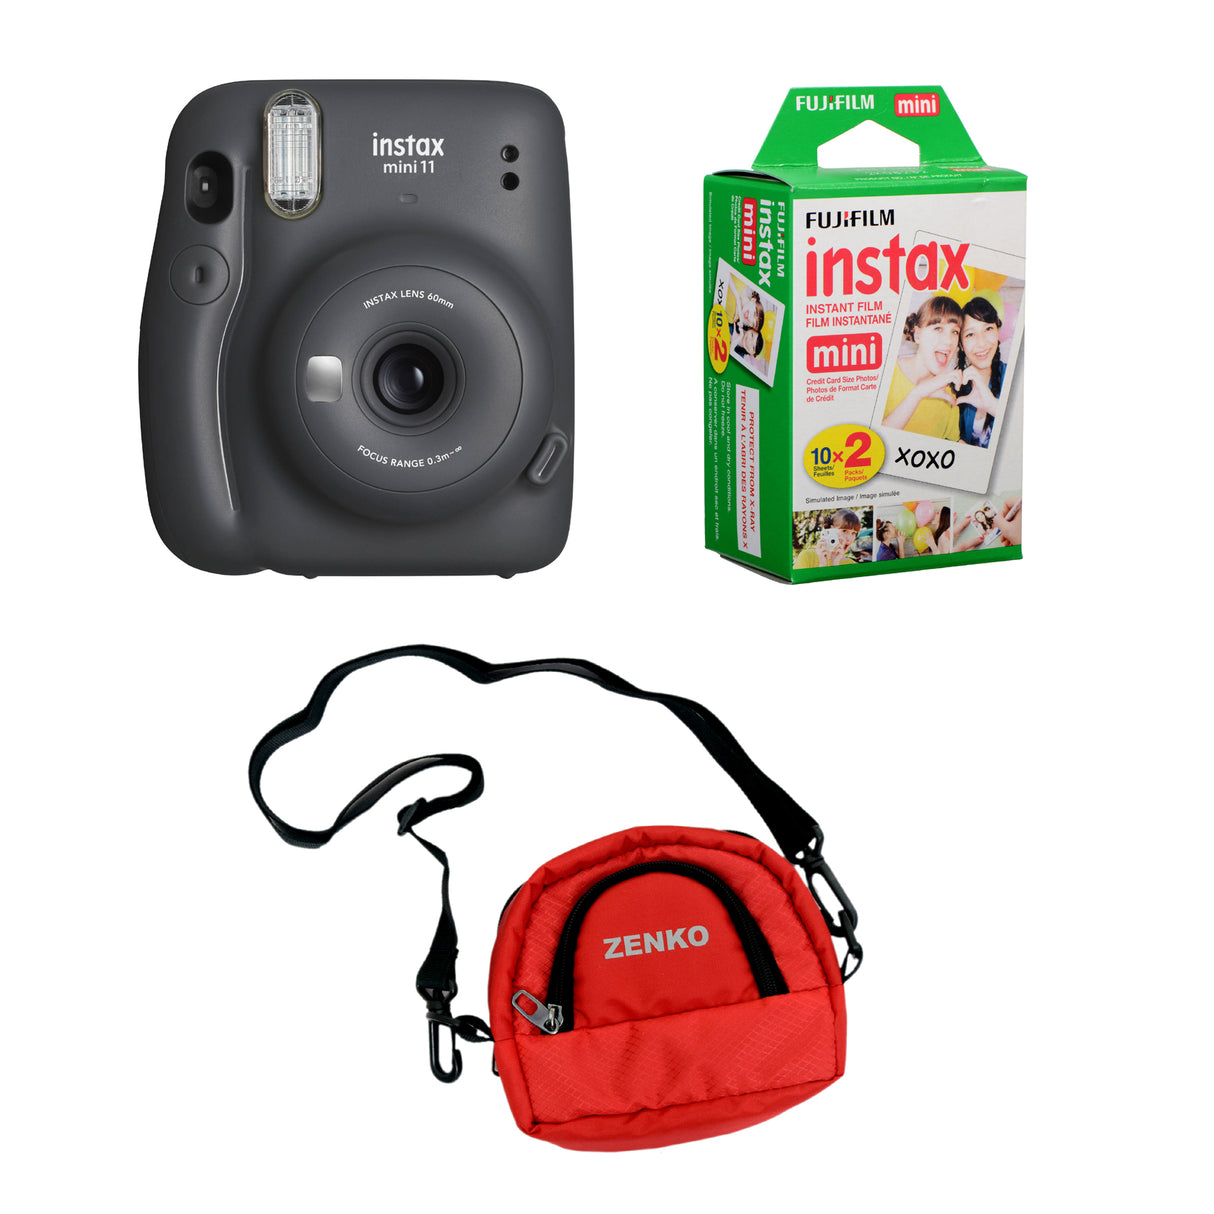 FUJIFILM INSTAX Mini 11 Instant Film Camera with Twin Pack of Instant Film With Red Pouch Kit (20 Exposures) Charcoal Gray